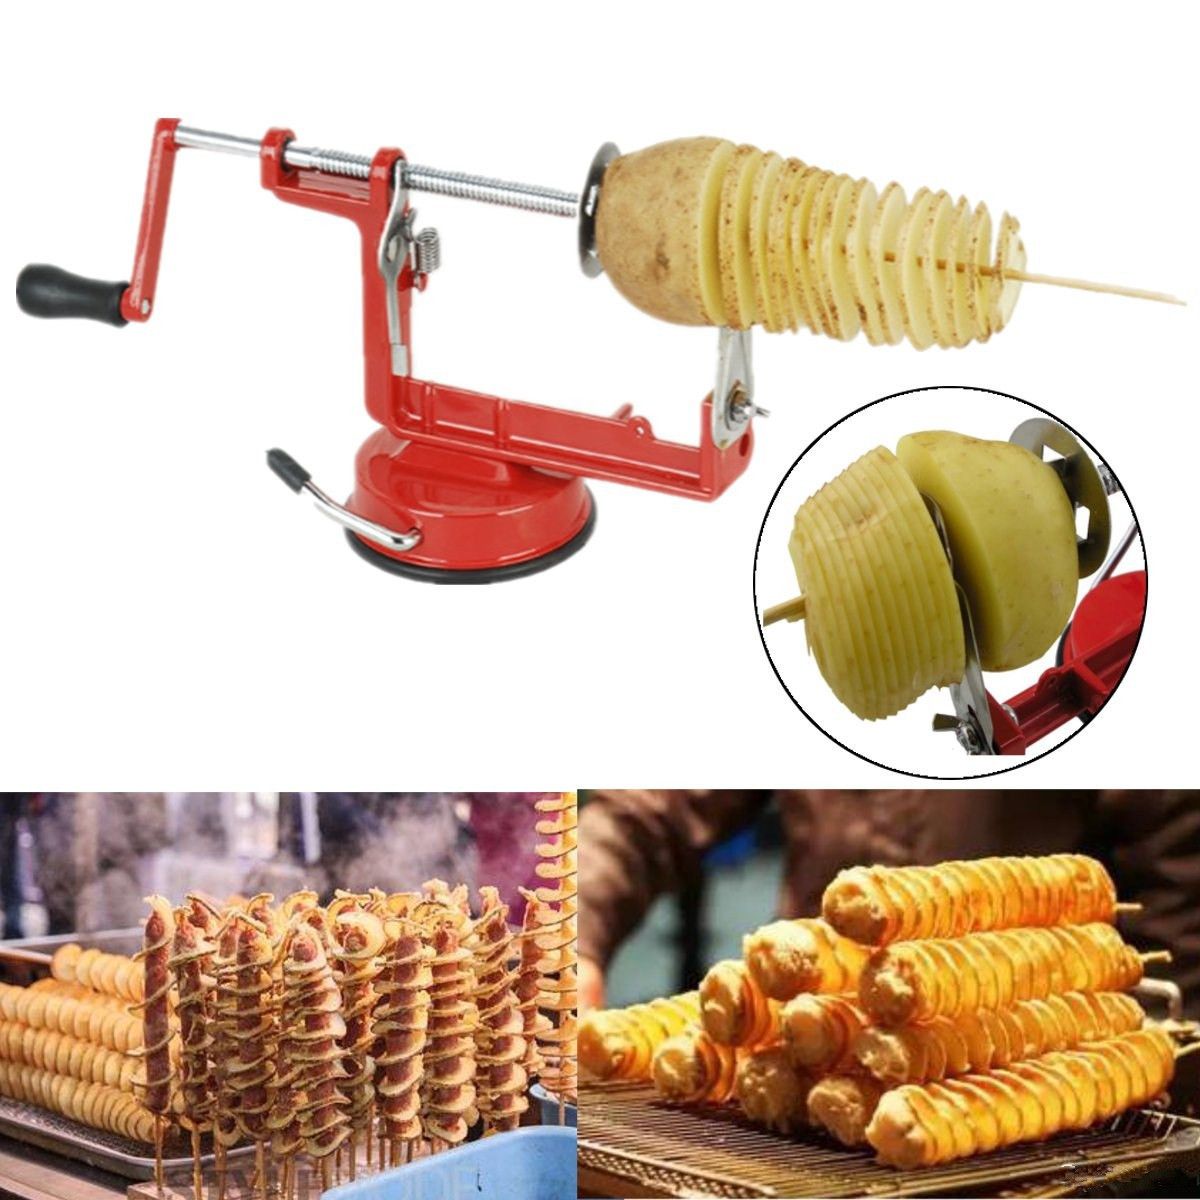 Manual-Blade-Twisted-Potato-Slicer-Stainless-Steel-Spiral-Cutter-Tool-1143505